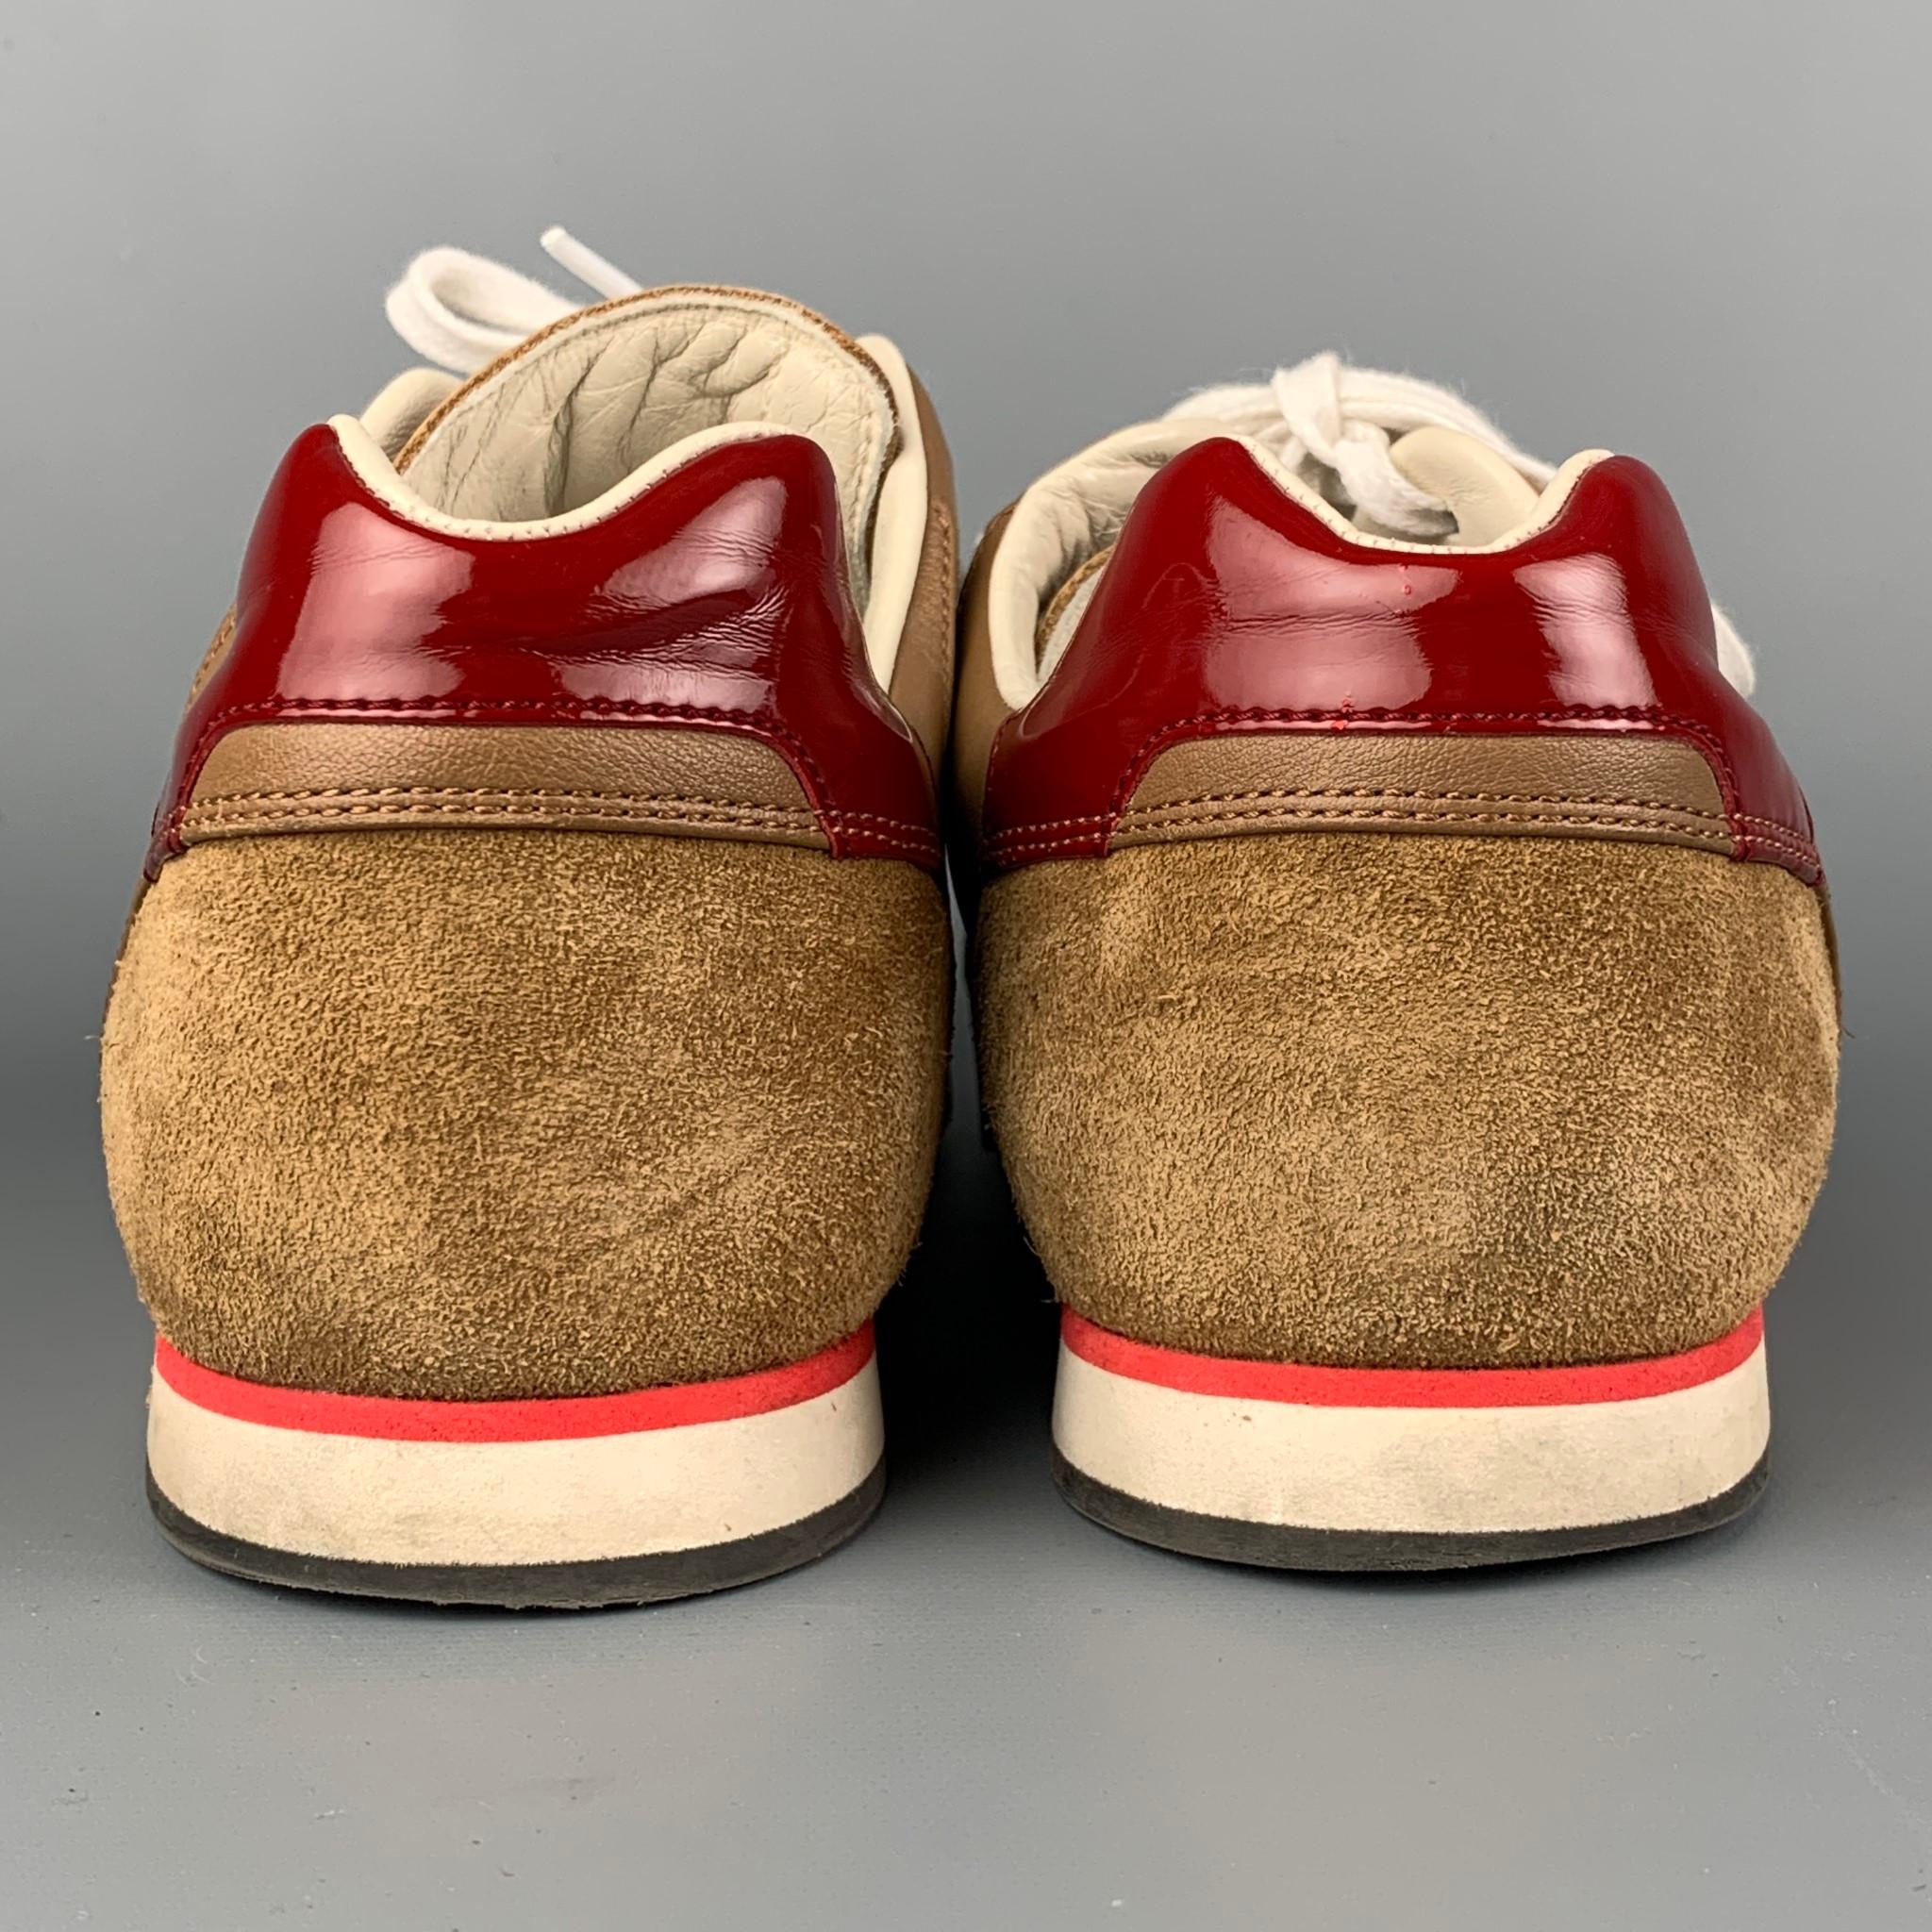 Beige GUCCI Size 9 Tan & Red Suede Low Top Sneakers